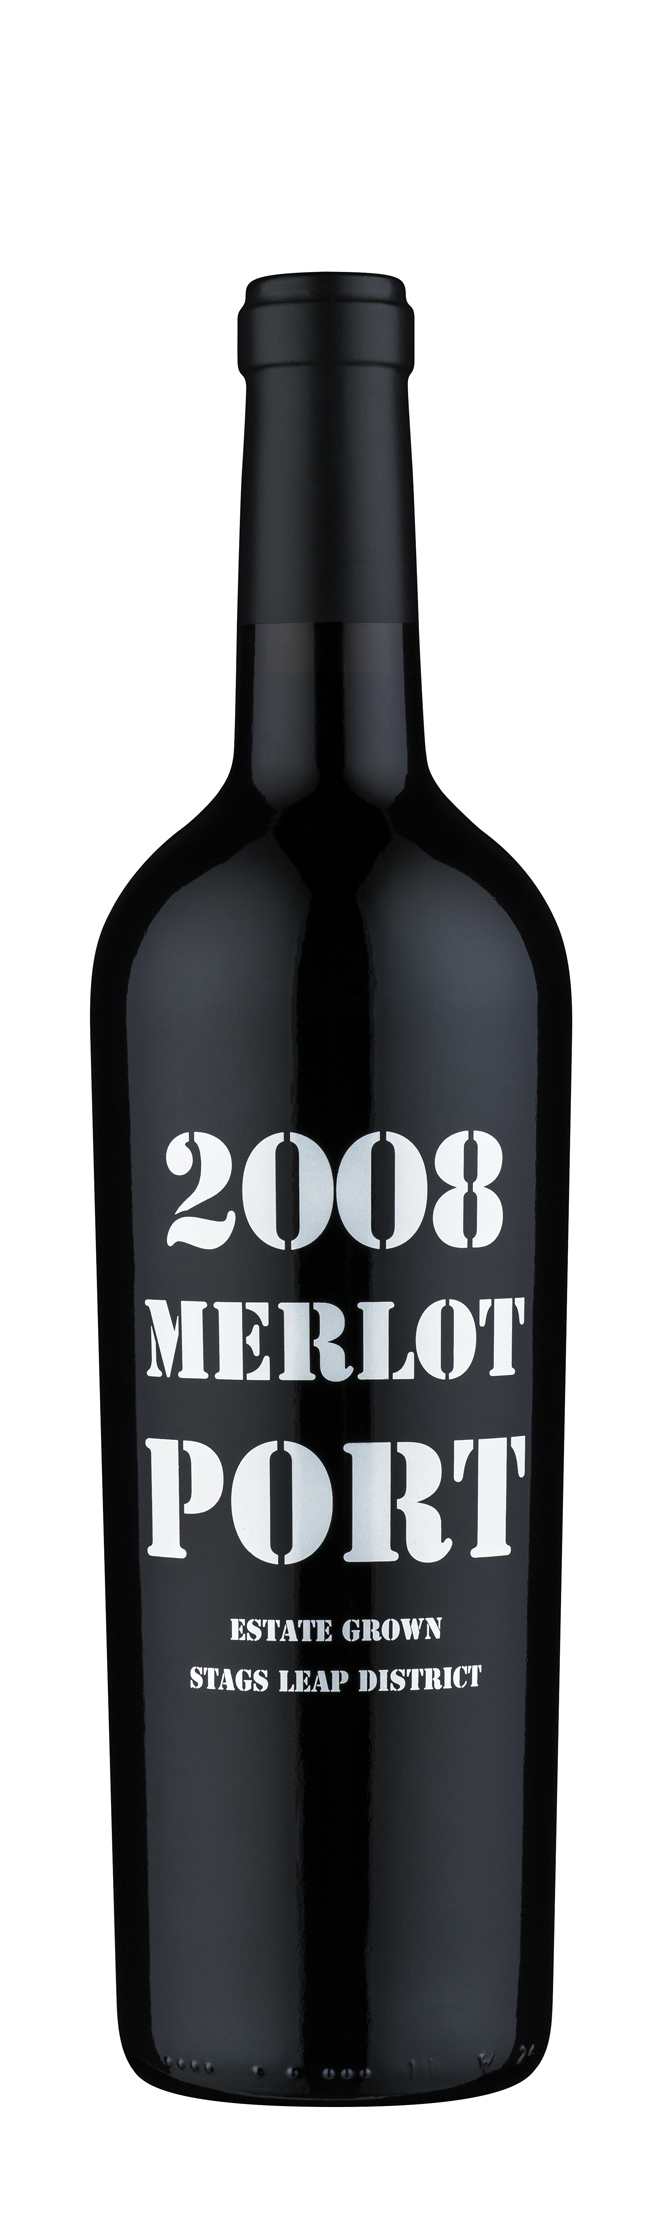 Product Image for 2008 Estate Merlot Port, Stags Leap District